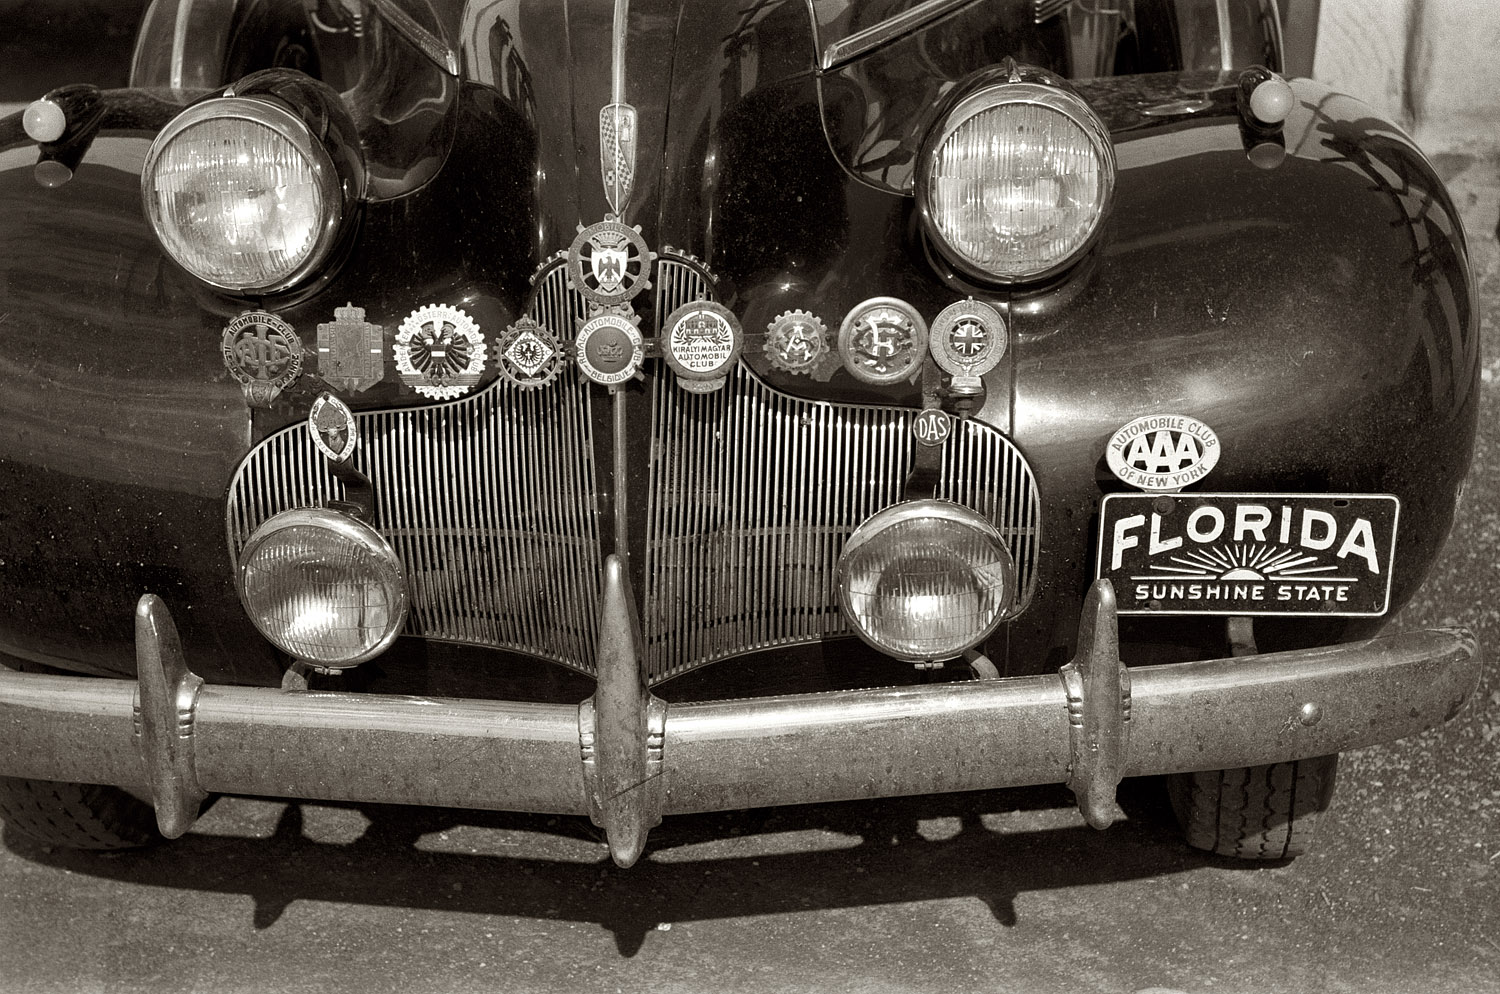 May or June 1940. "Insignias on tourist's car seen in Silver City, New Mexico." View full size. 35mm nitrate negative by Russell Lee for the FSA.